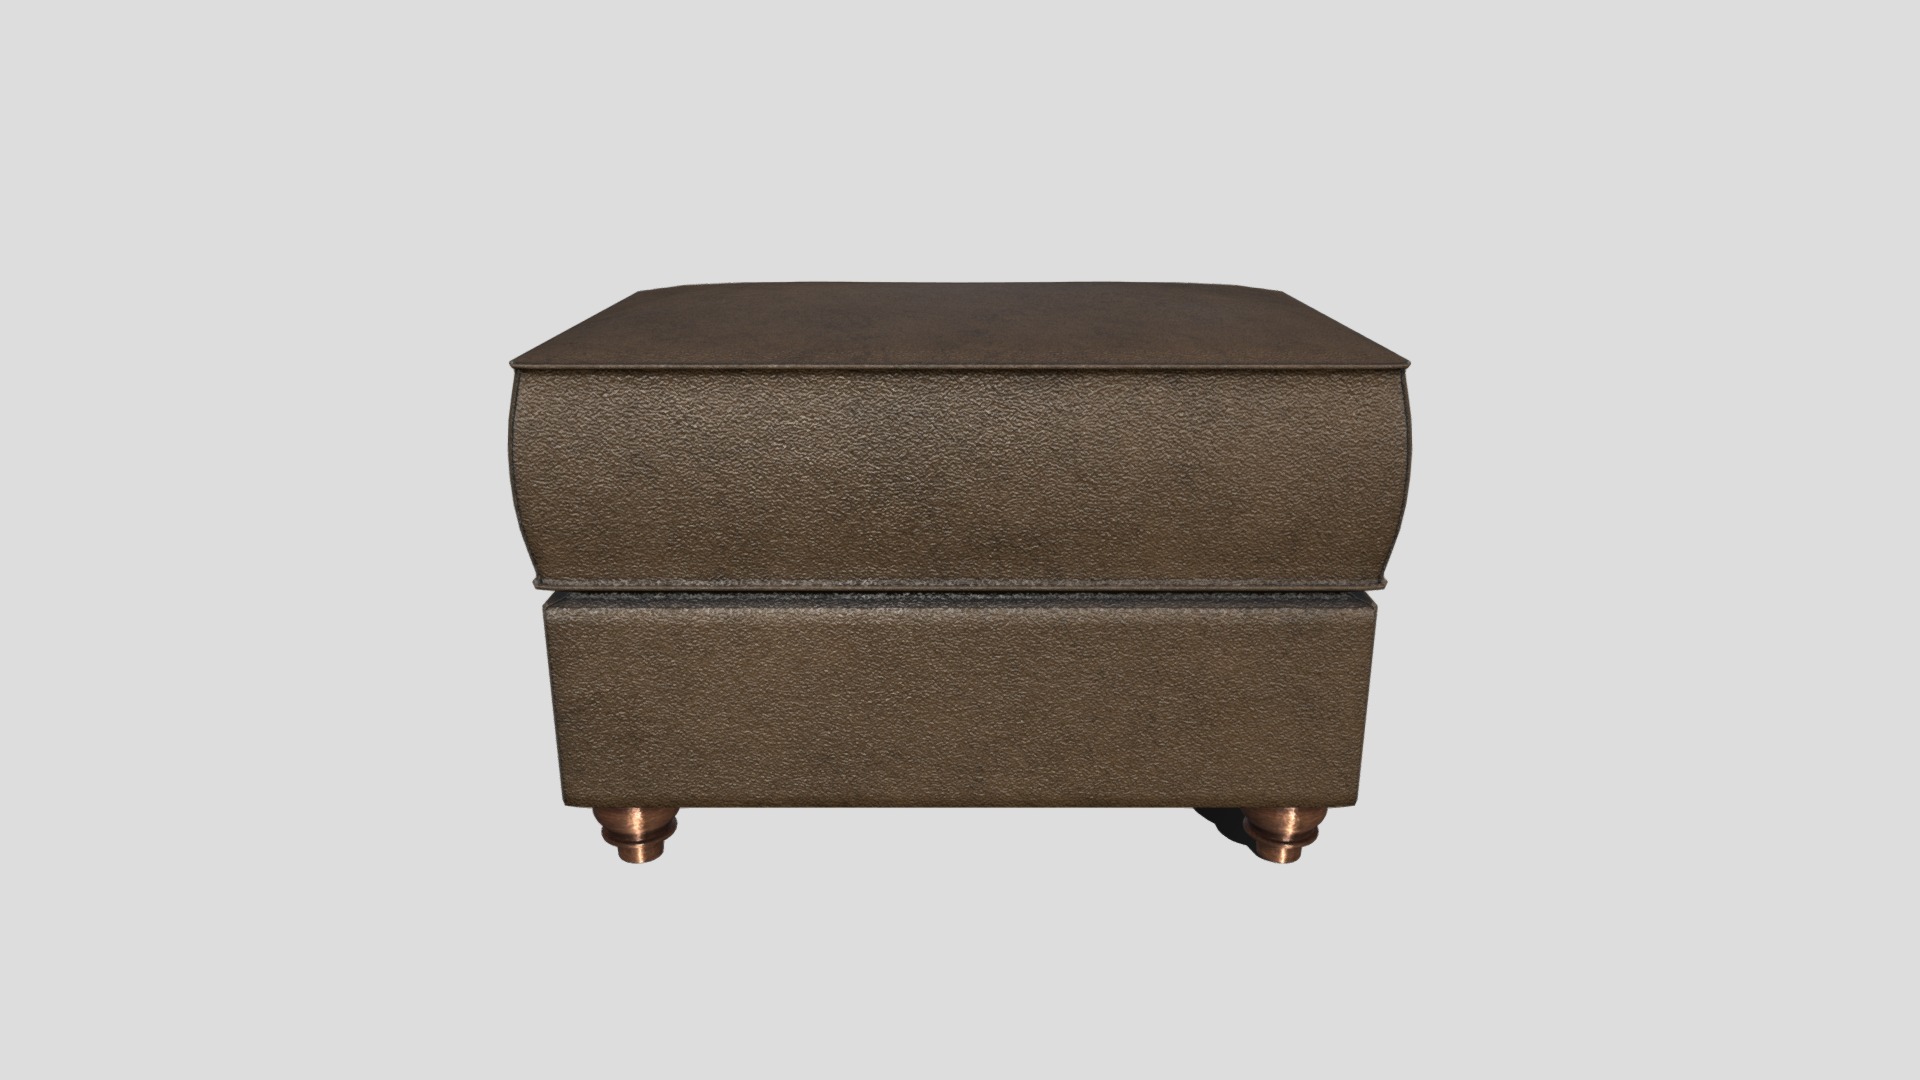 3D model Foot Stool - This is a 3D model of the Foot Stool. The 3D model is about a brown rectangular object.